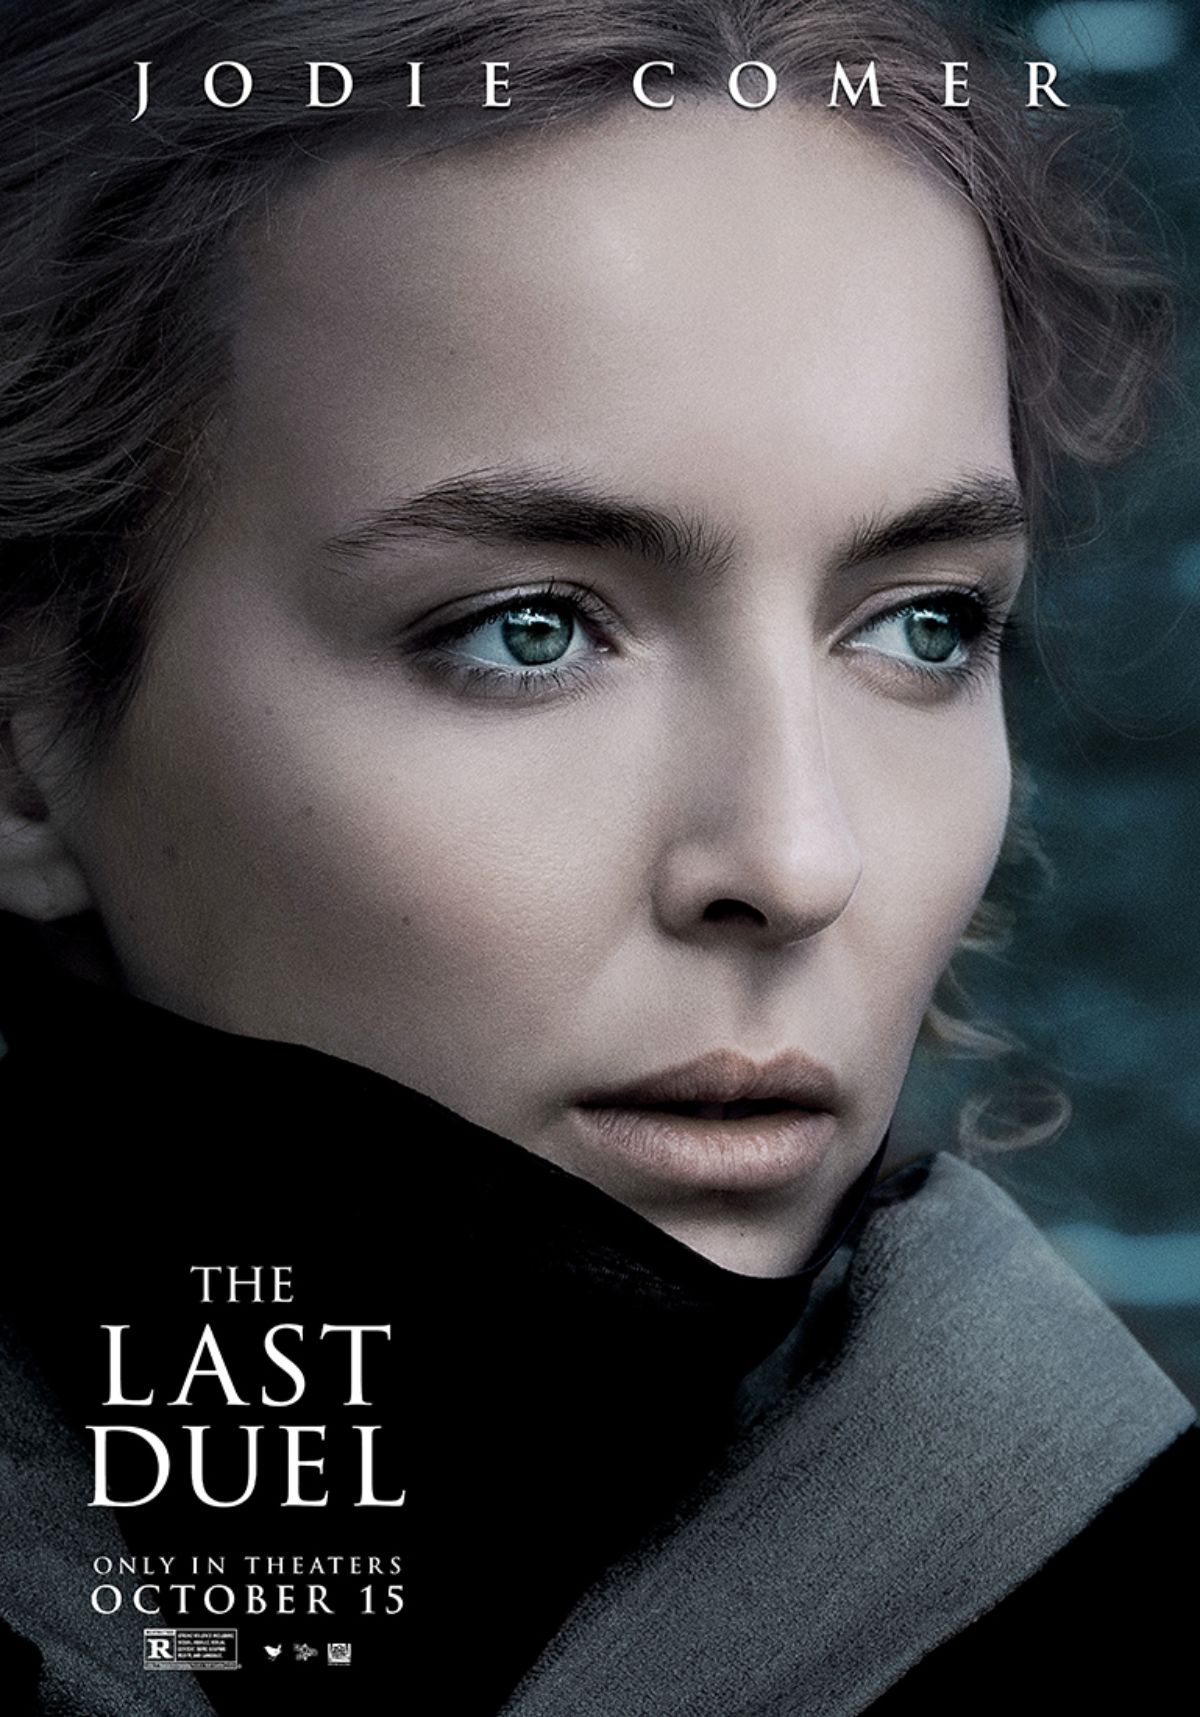 the-last-duel-jodie-comer-postercopy